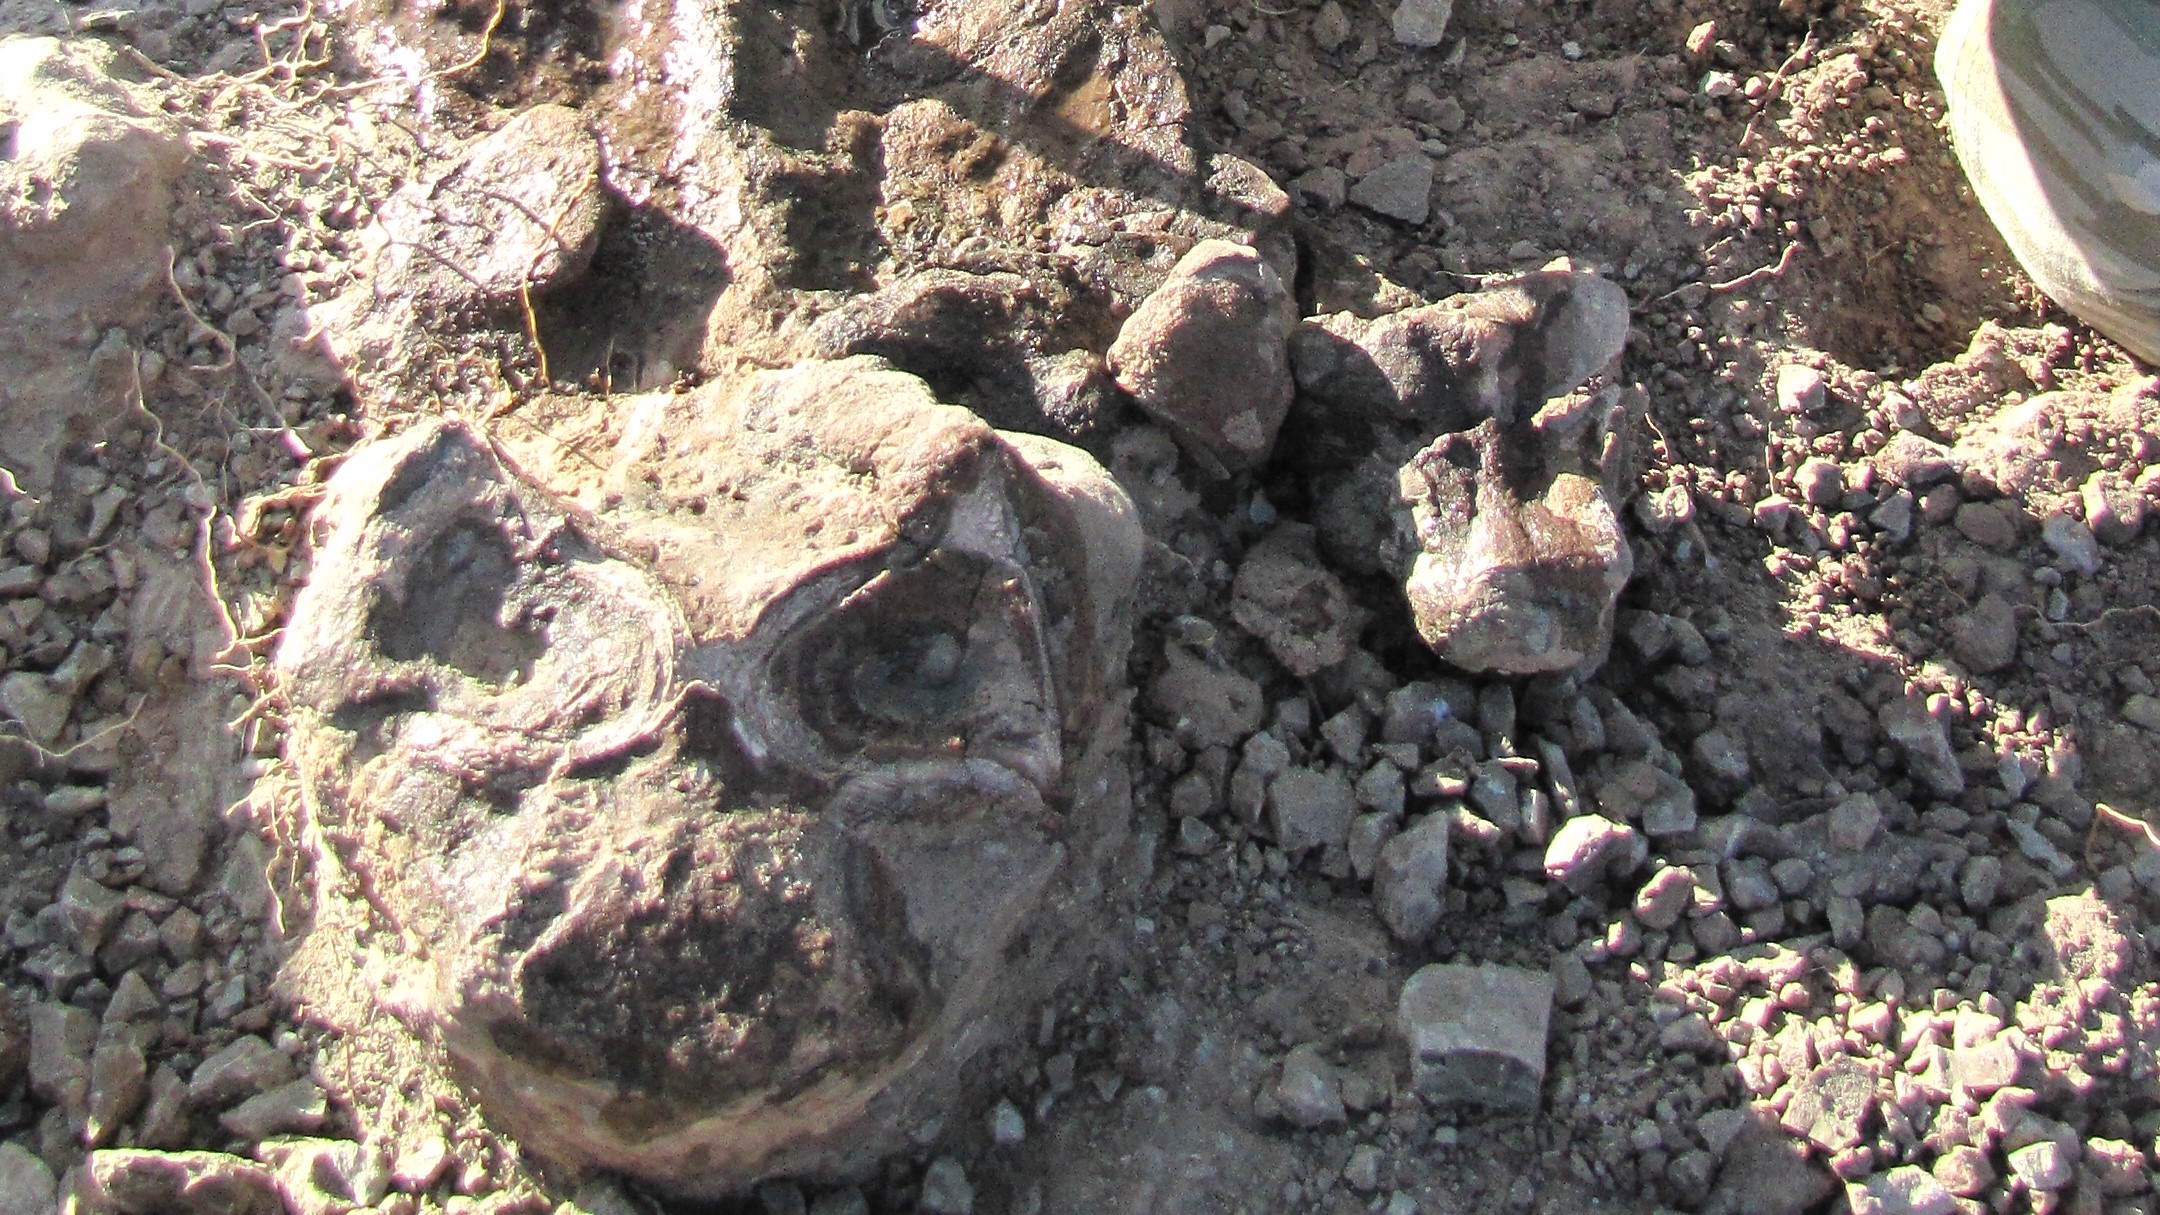 Face to face with a lystrosaur fossil in the field.  The animals appeared to have died in groups, perhaps indicating that they were gathering around dwindling water supplies during a drought.